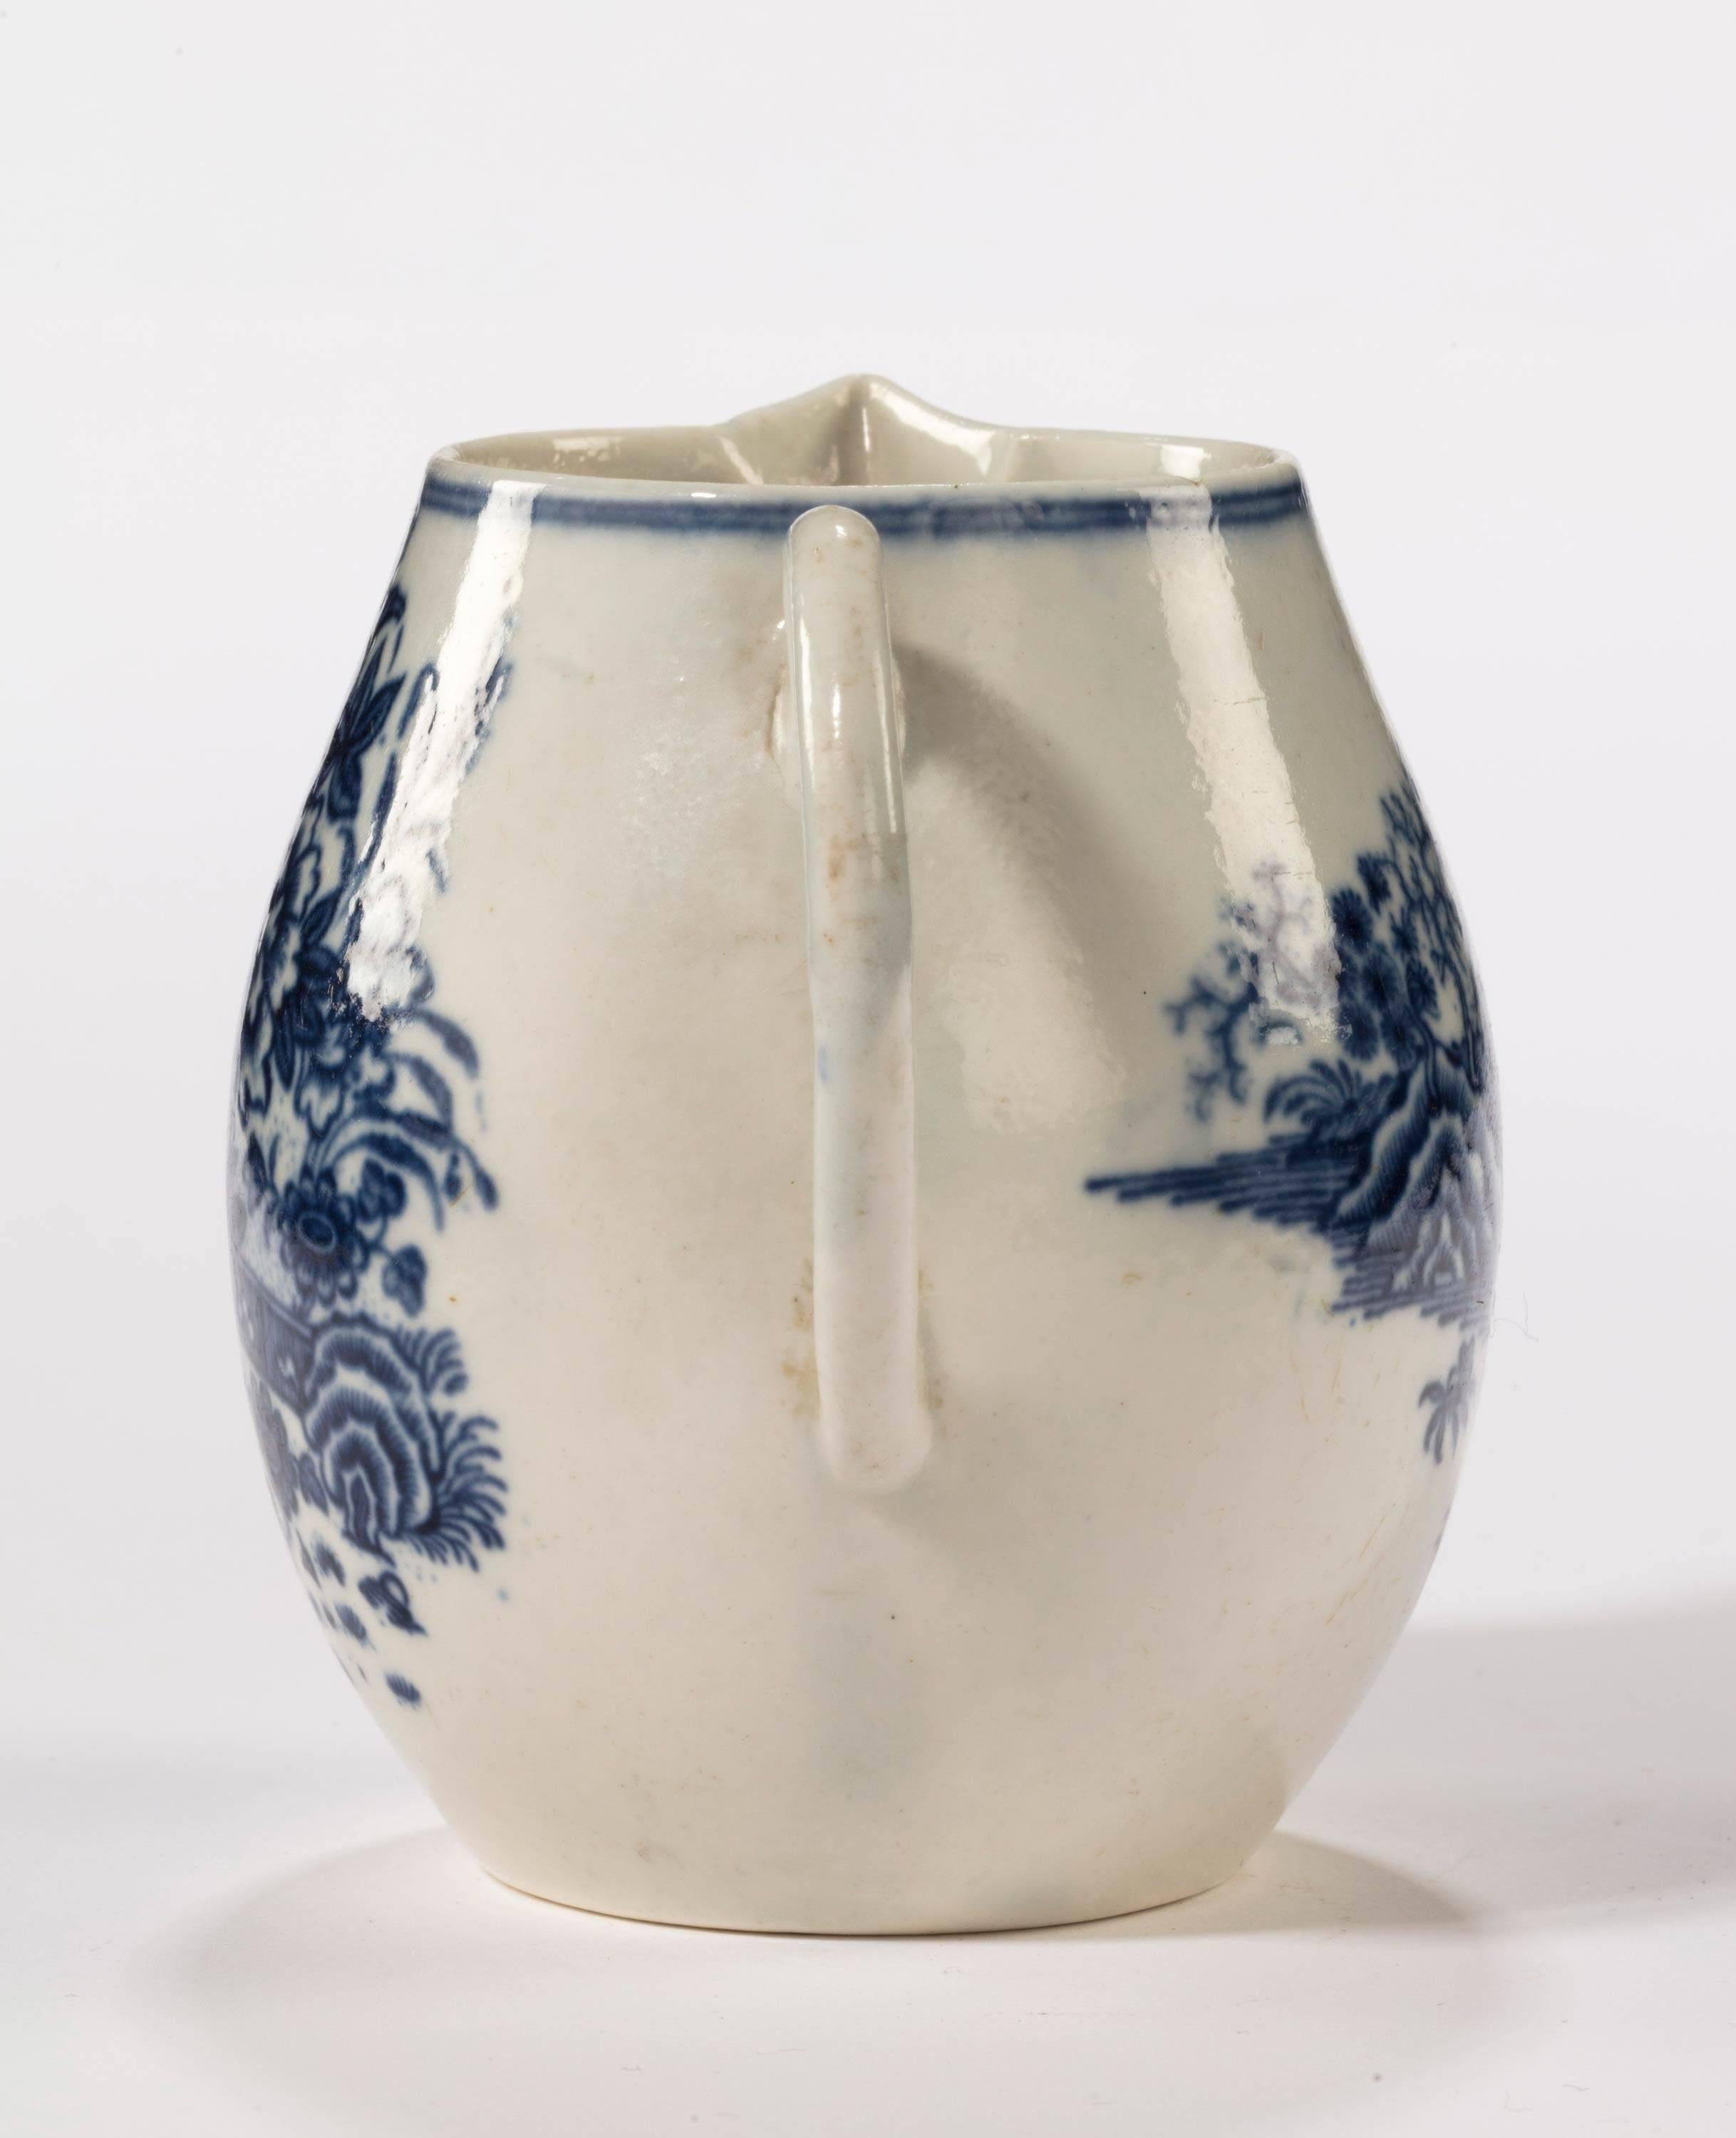 An attractive Liverpool blue and white printed jug of baluster form. A very minor chip to the inside of the top rim.